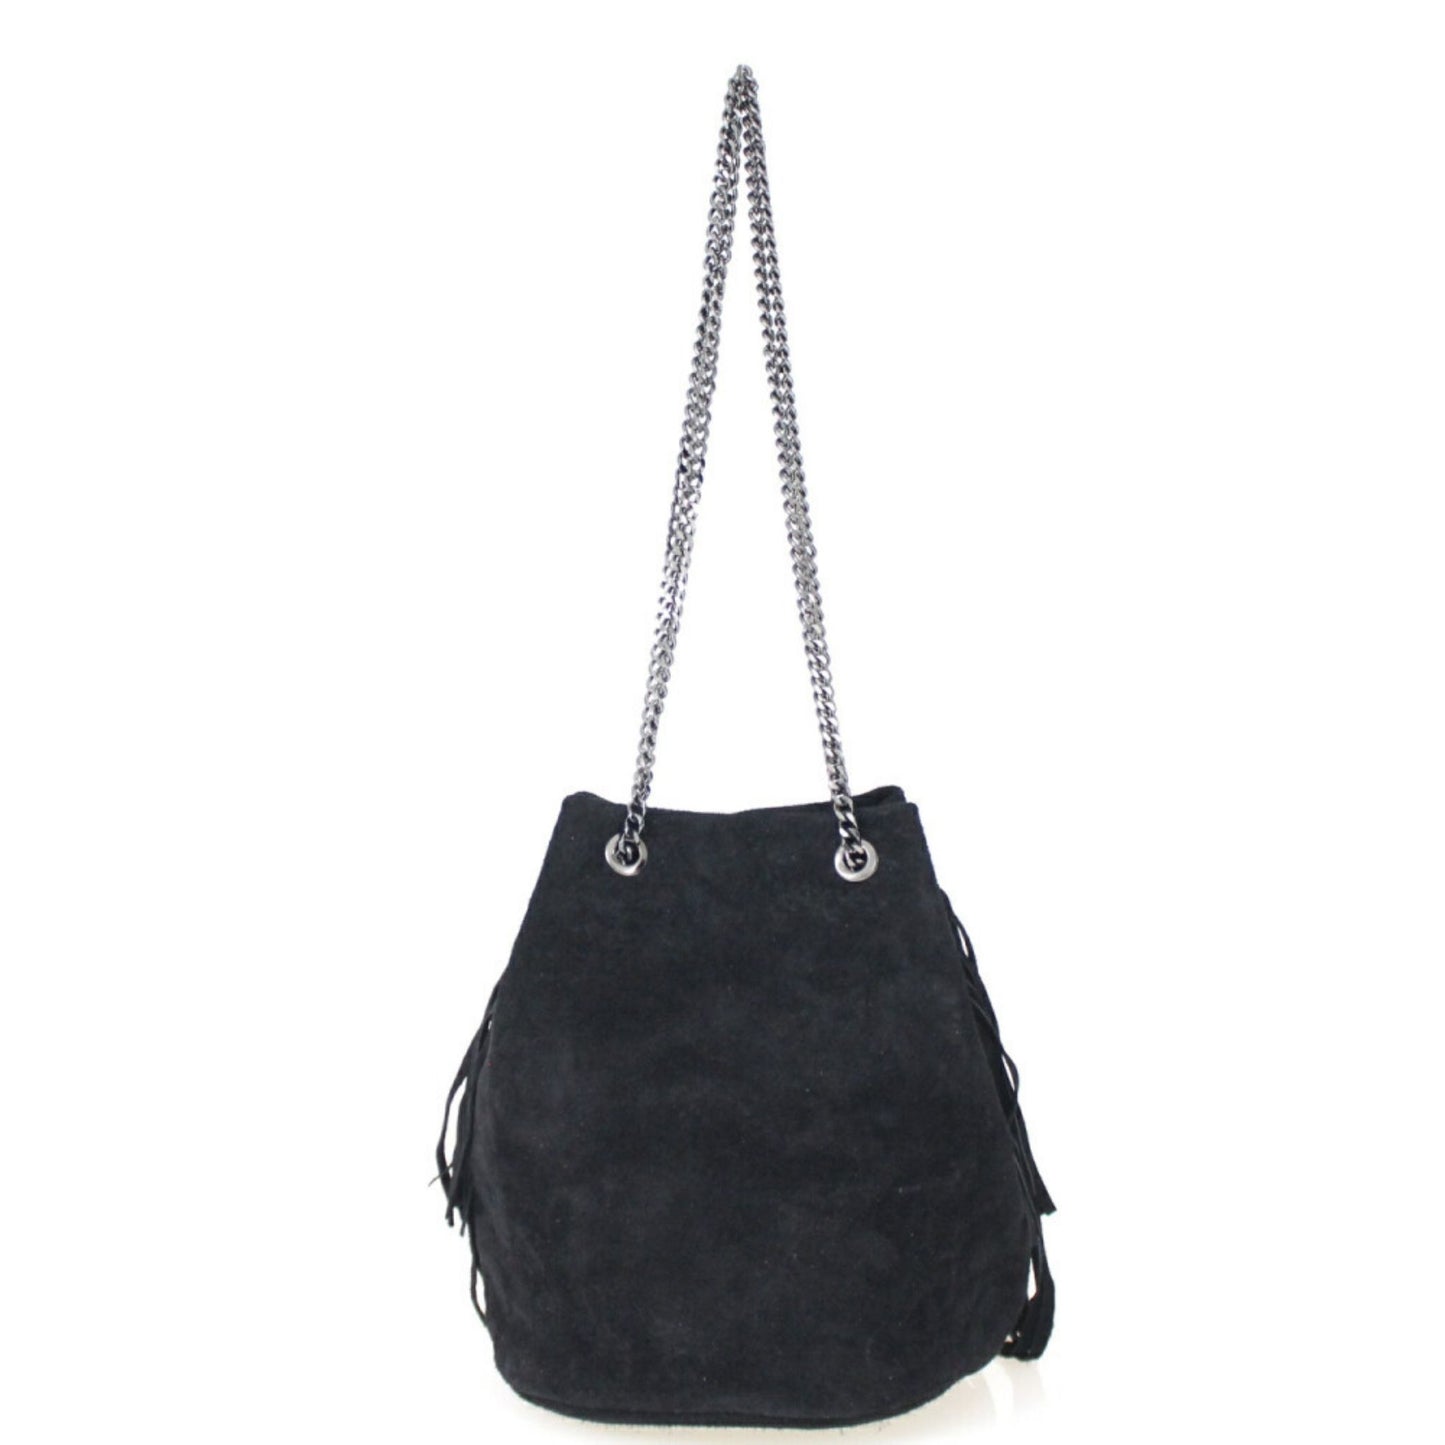 The Small Fringed Suede Bag